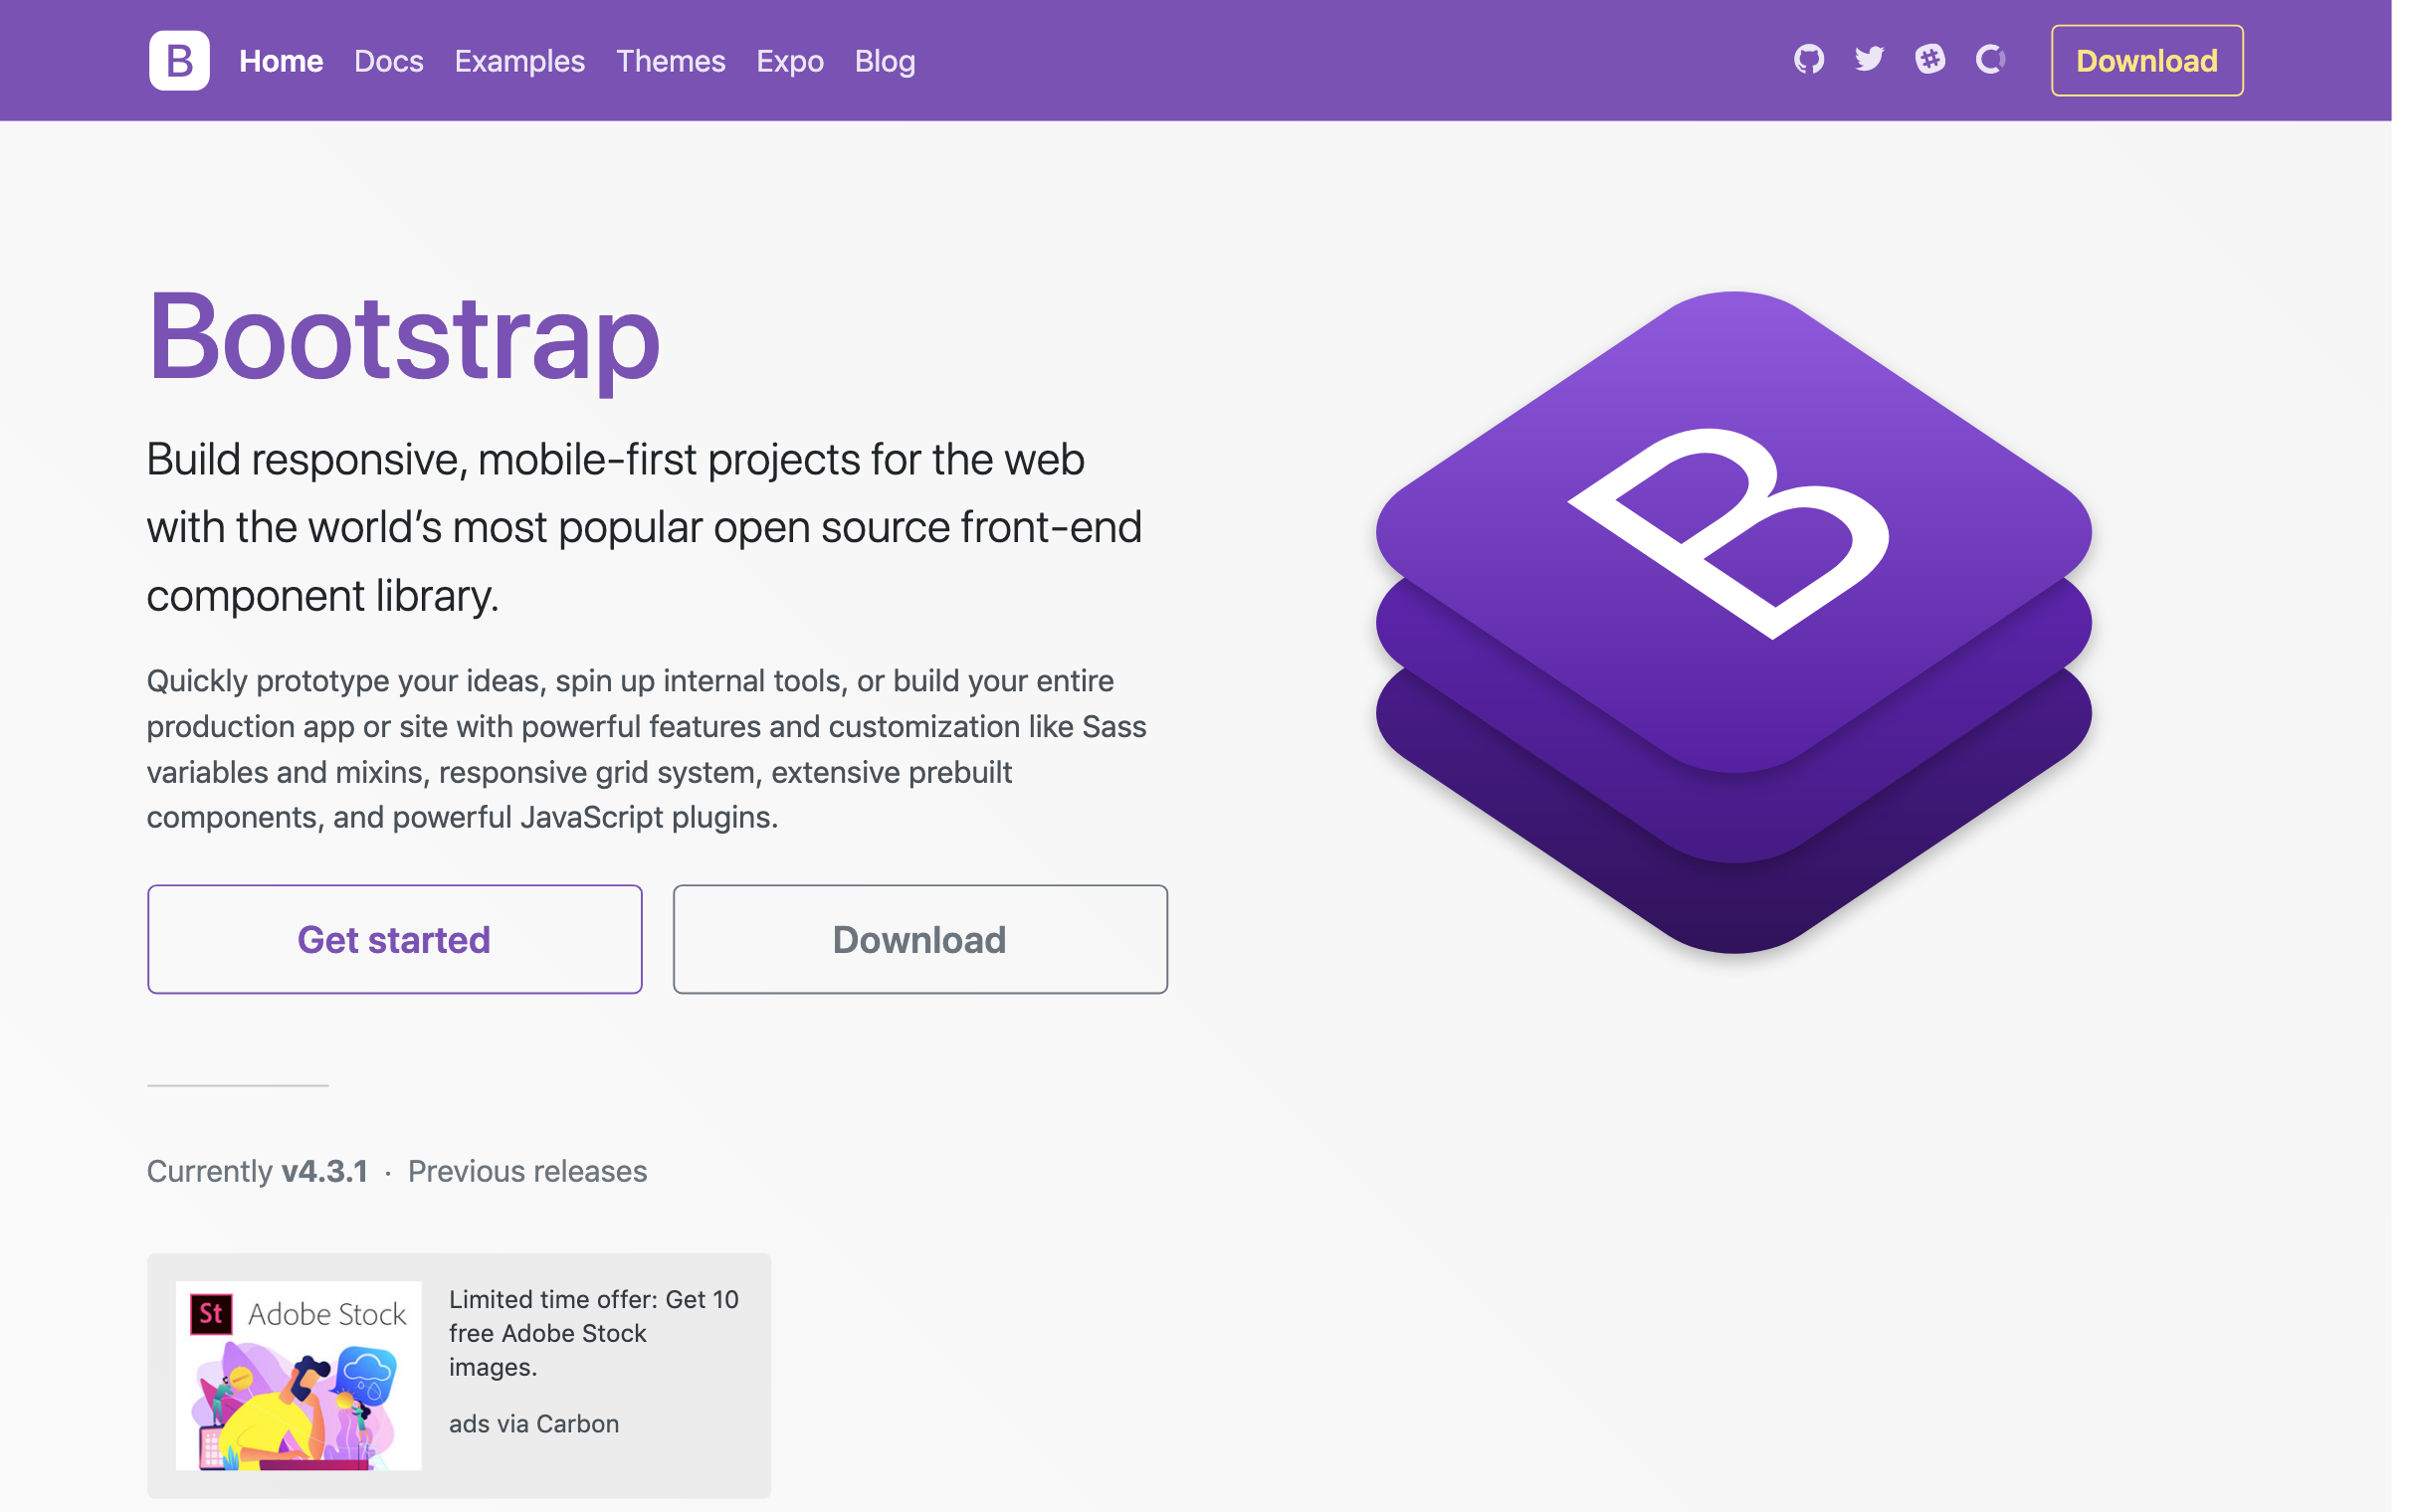 bootstrap-5